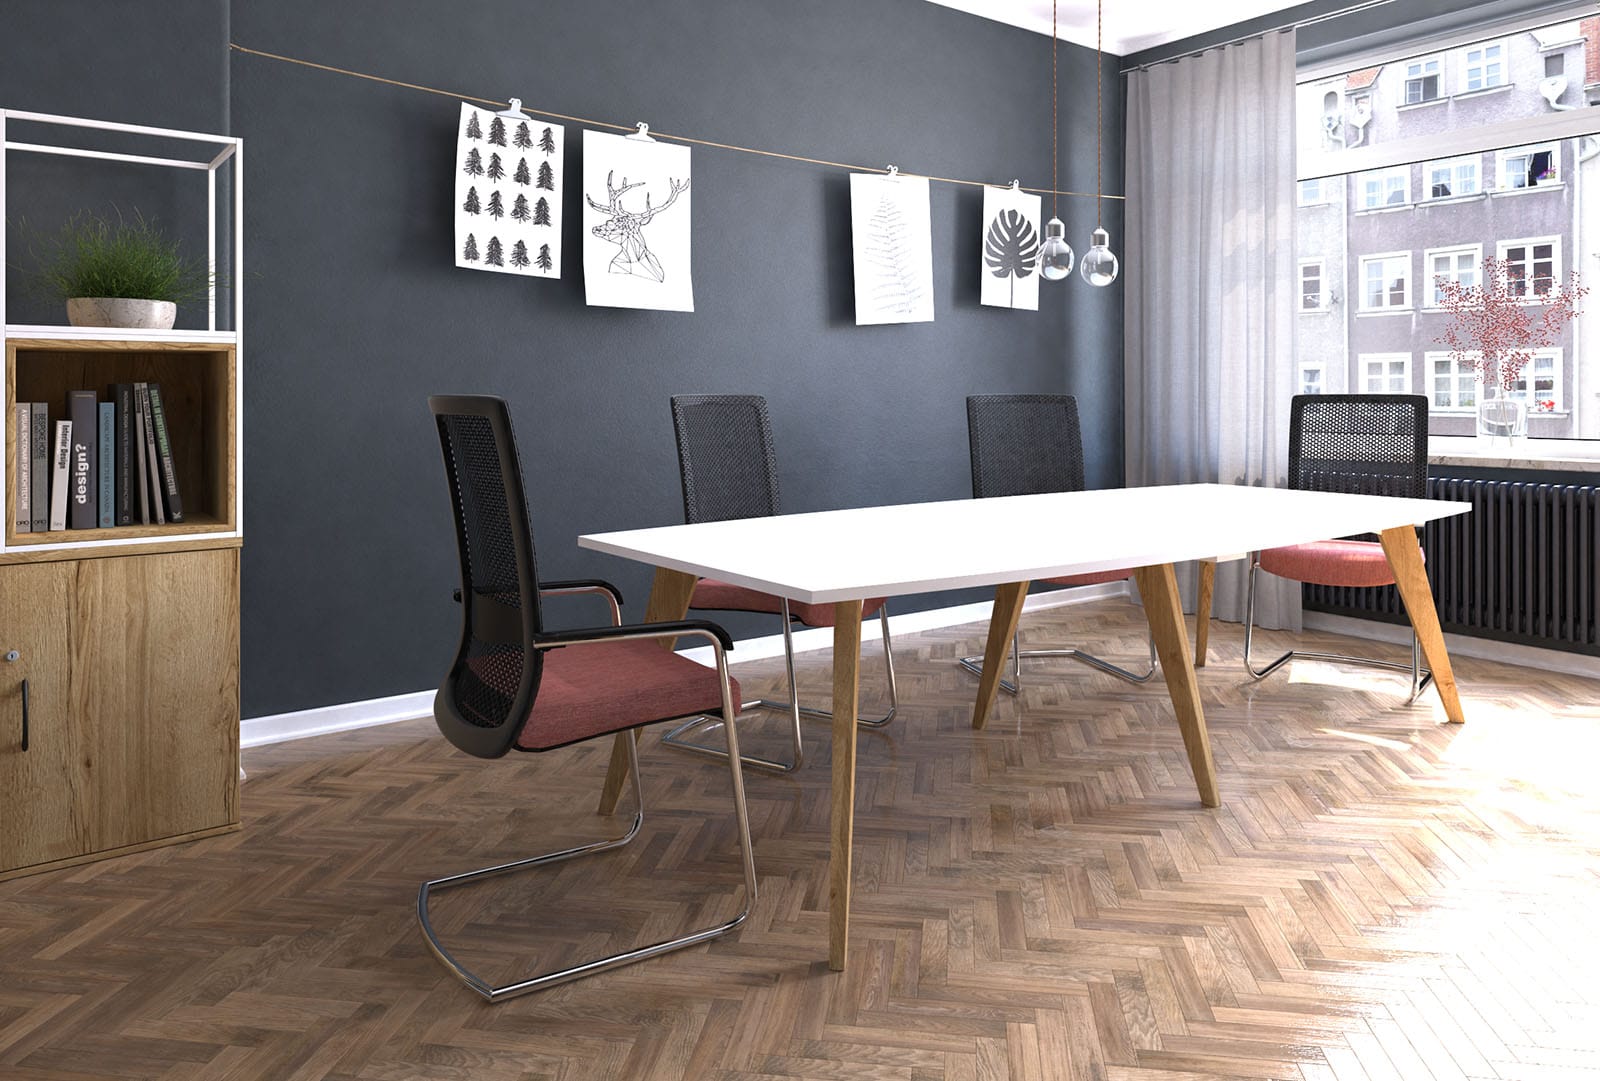 If you're looking for made-to-measure meeting room tables, look no further than Pure Office Solutions.